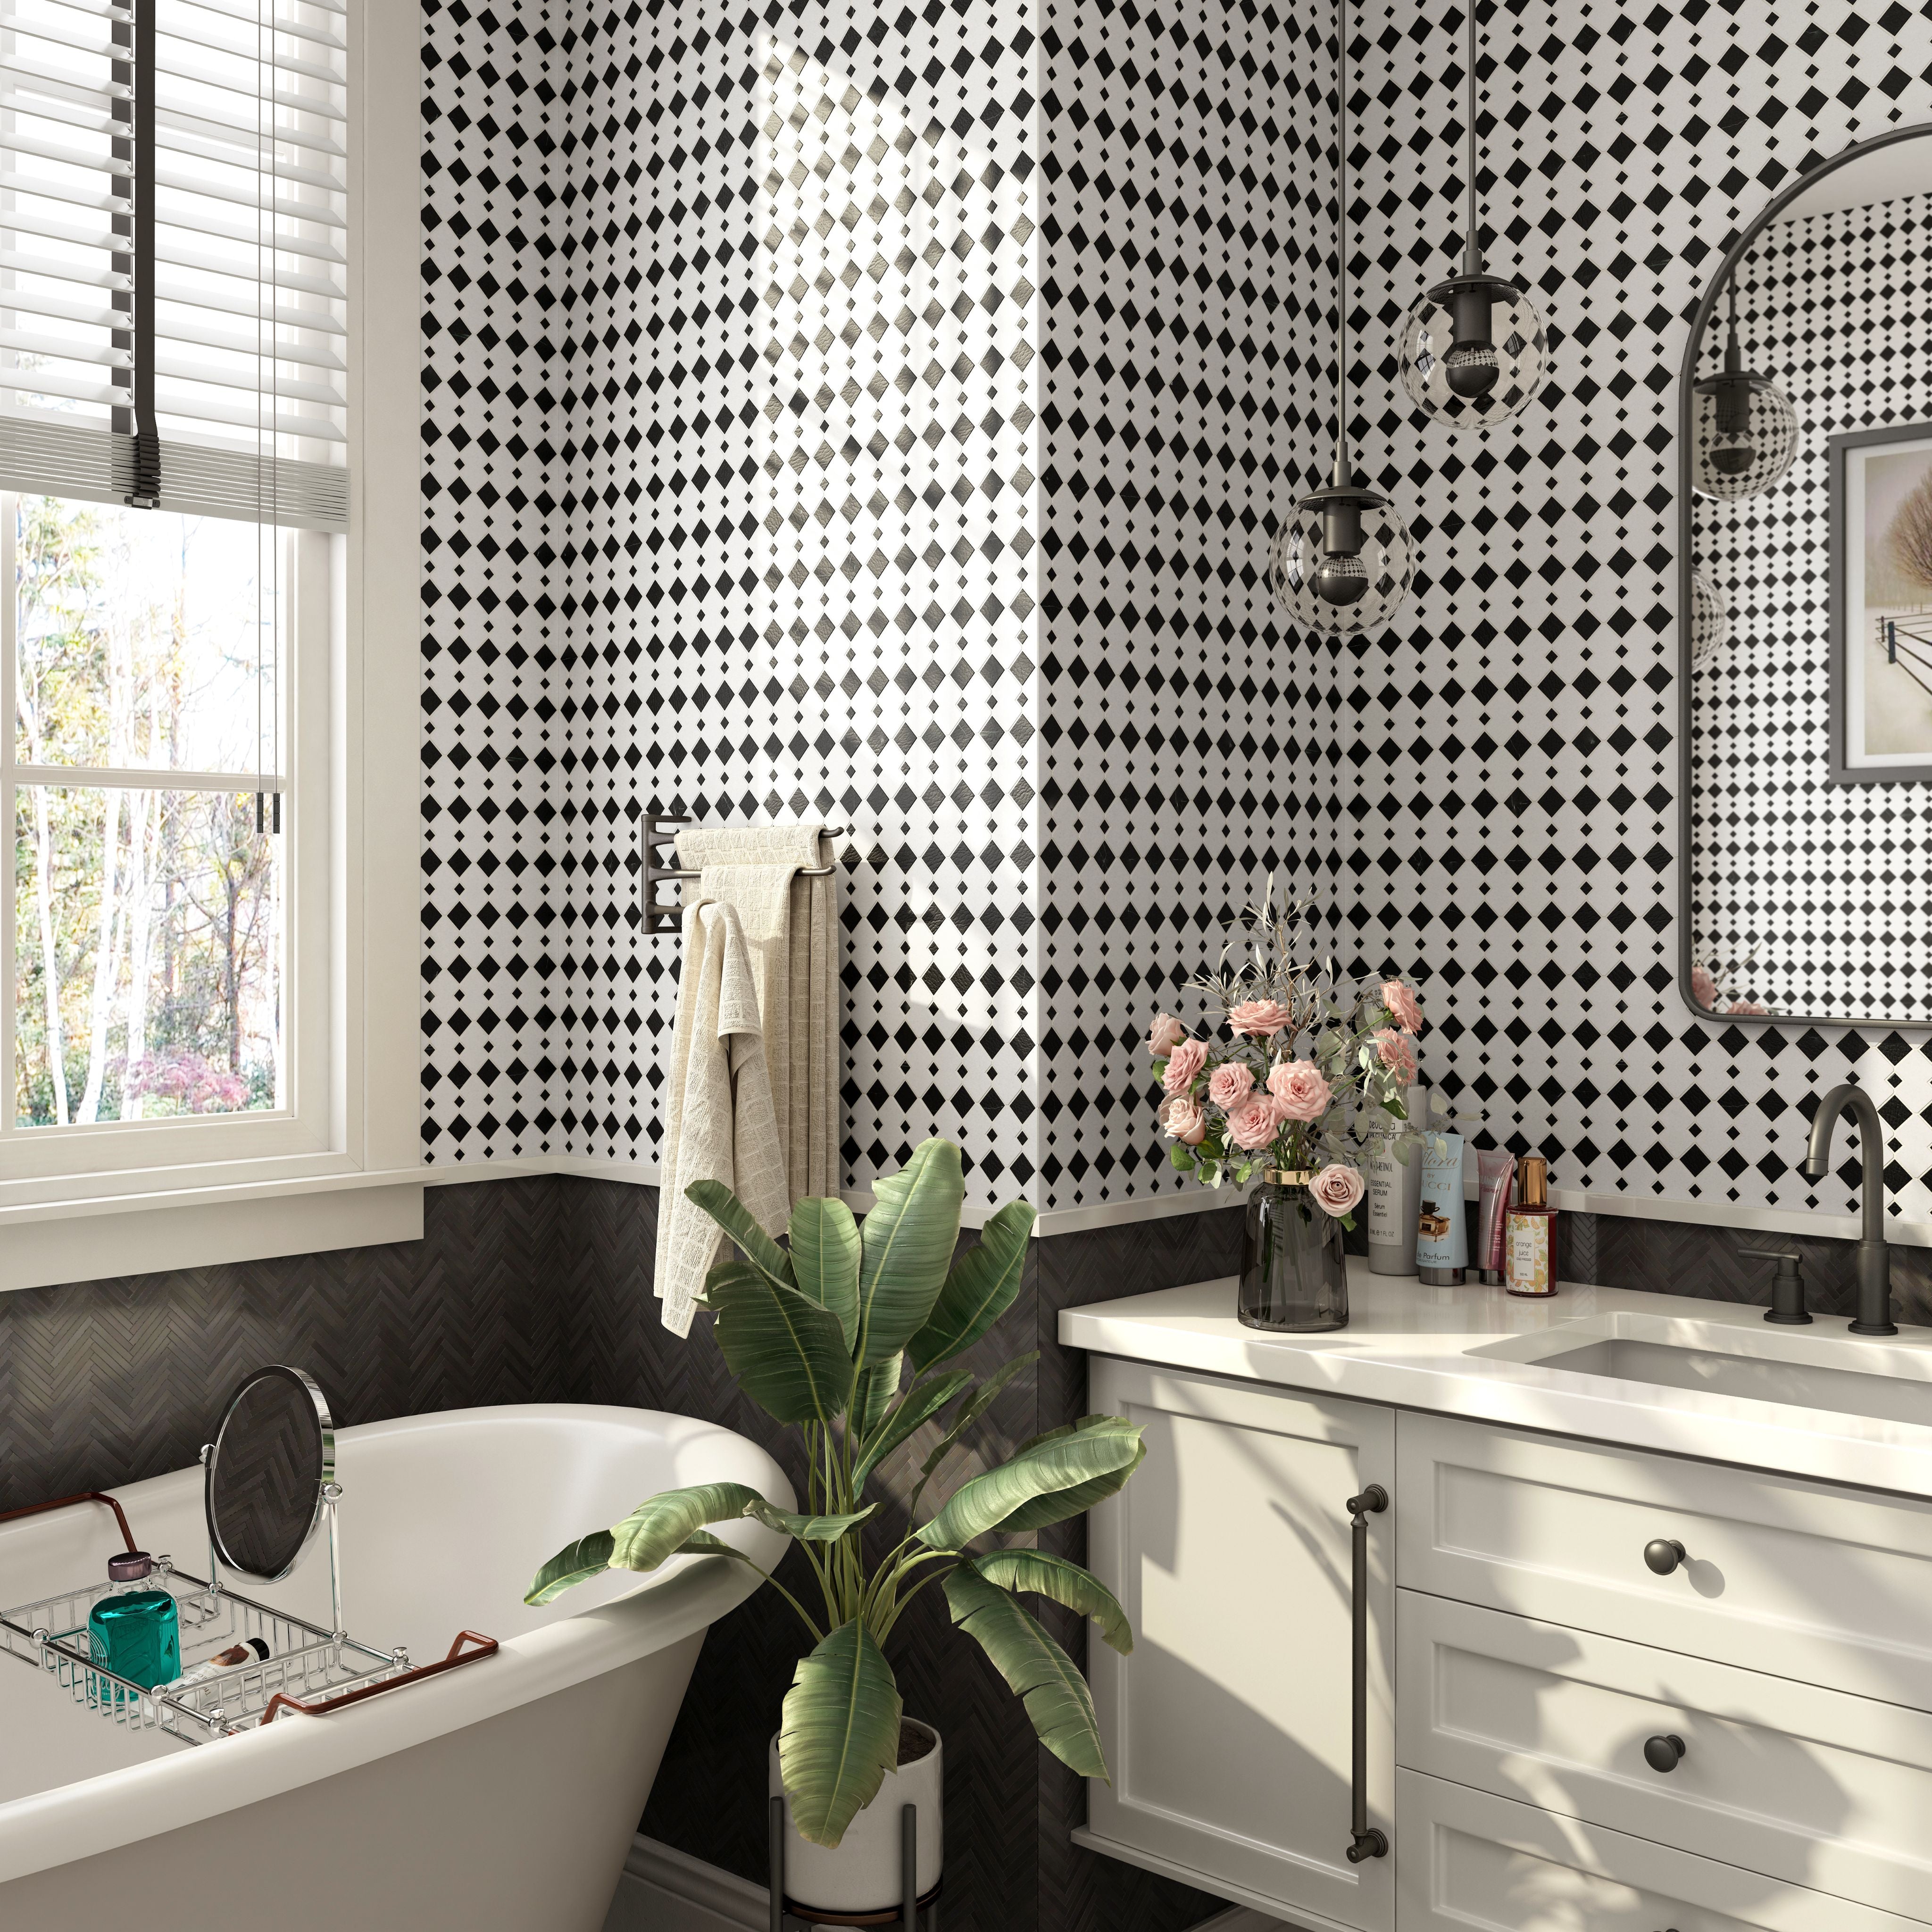 dulcet tassel black 1mtslthx natural stone mosaic interior 1 made by dulcet and sold by surface group international